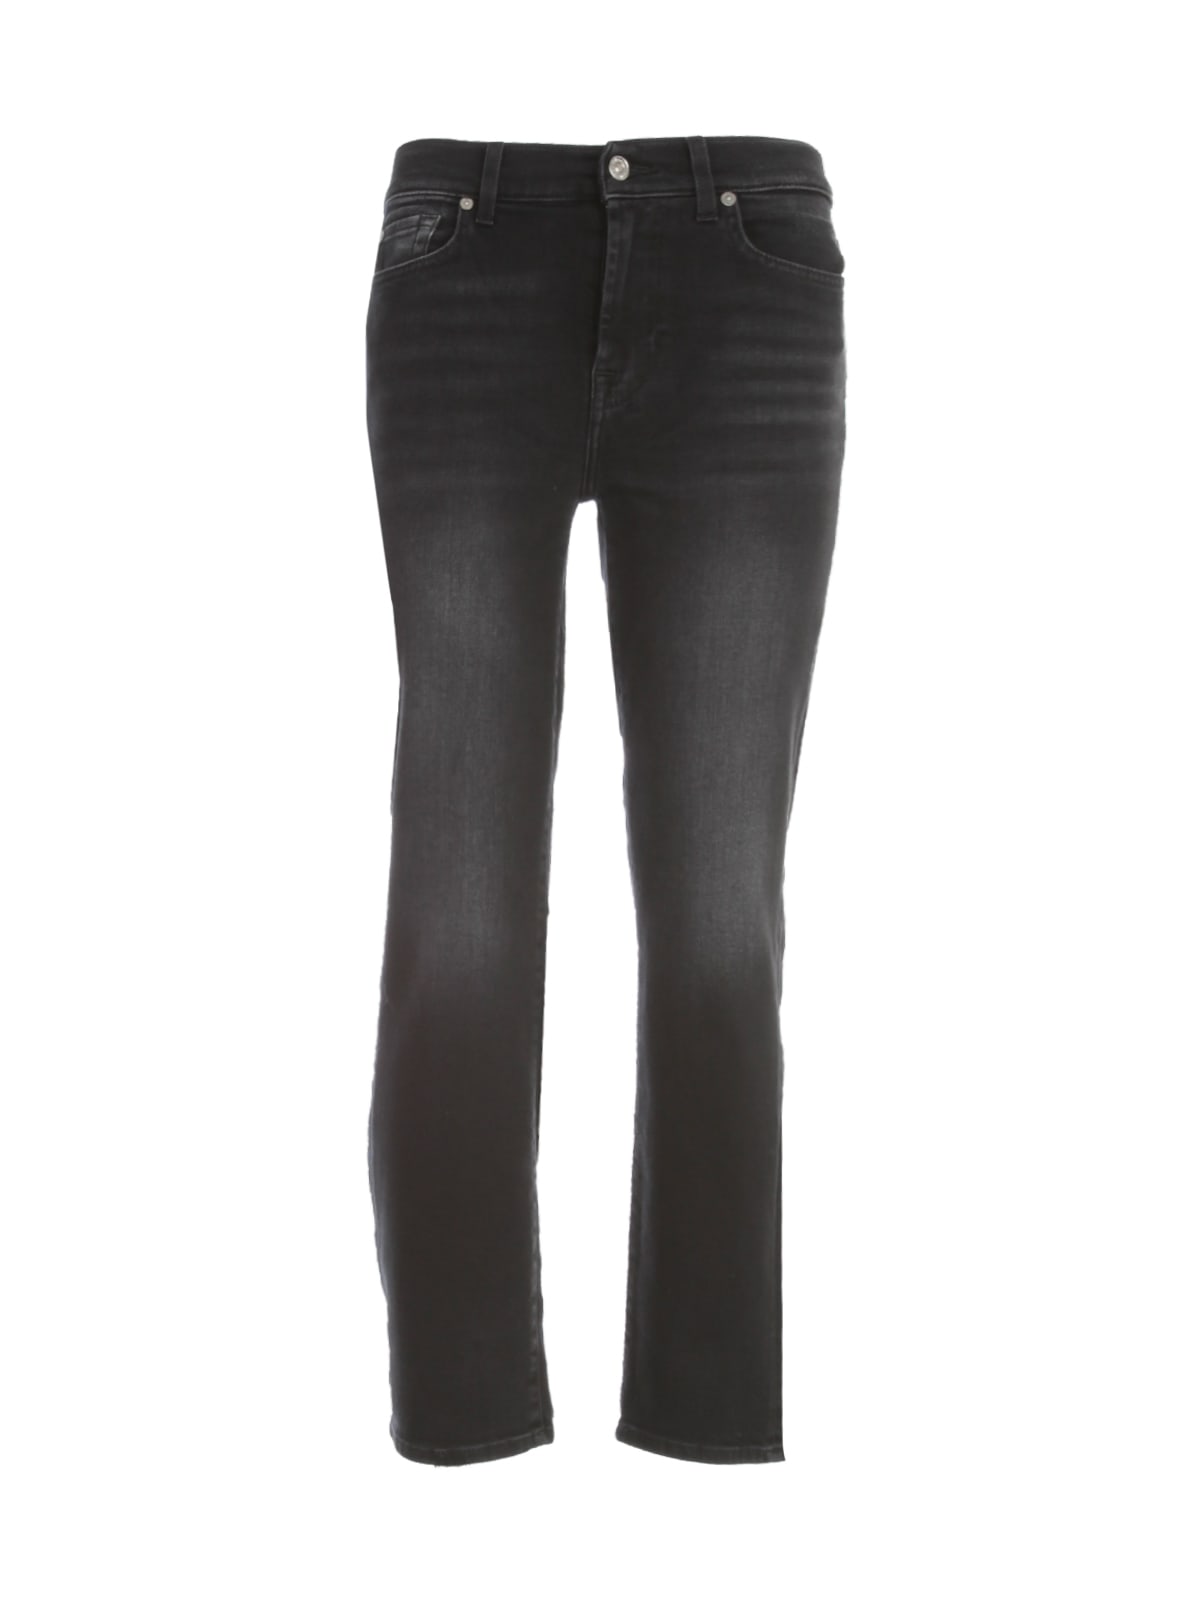 7 For All Mankind The Straigh Crop Soho Black